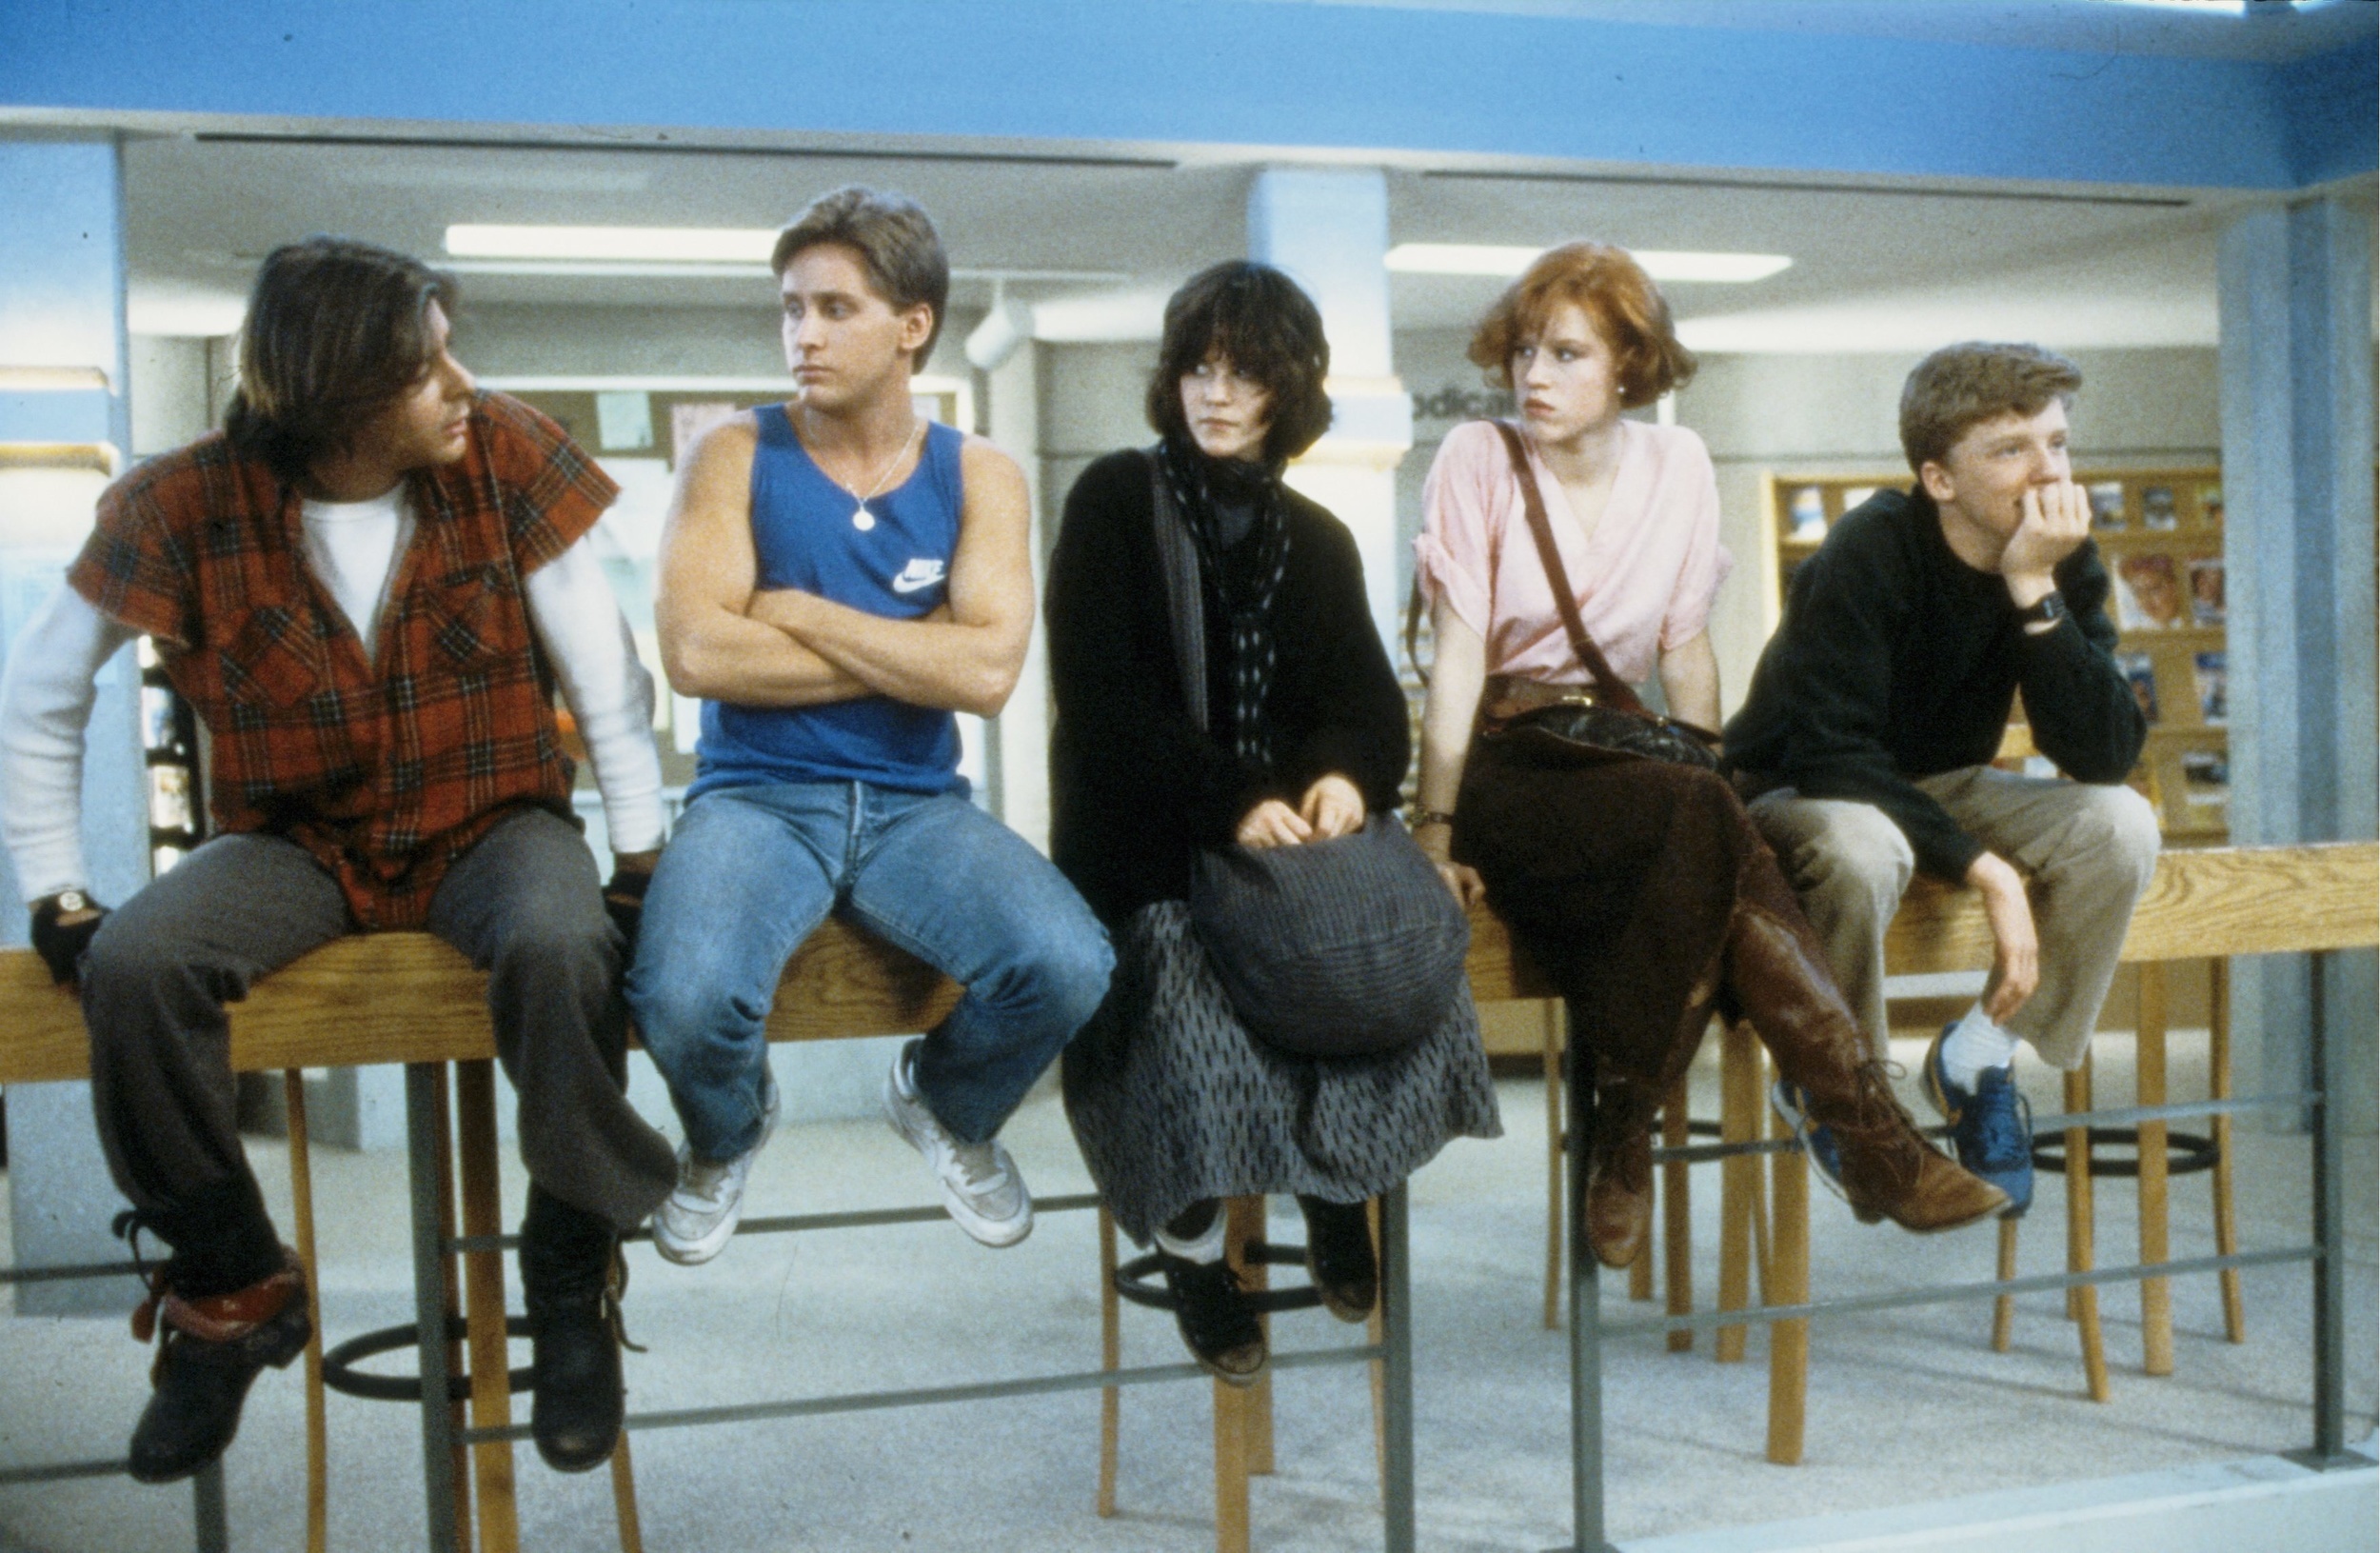 <p>An athlete (Emilio Estevez), princess (Molly Ringwald), brain (Anthony Michael Hall), basket case (Ally Sheedy), and criminal (Judd Nelson) <a href="https://www.youtube.com/watch?v=BSXBvor47Zs">come together for Saturday detention</a> at Shermer High School. At the beginning of the day, they have nothing in common. By the end, their lives have changed. Another memorable and beloved John Hughes that will always remain relevant. </p><p>You may also like: <a href='https://www.yardbarker.com/entertainment/articles/the_major_film_debuts_of_movie_stars/s1__31825157'>The major film debuts of movie stars</a></p>